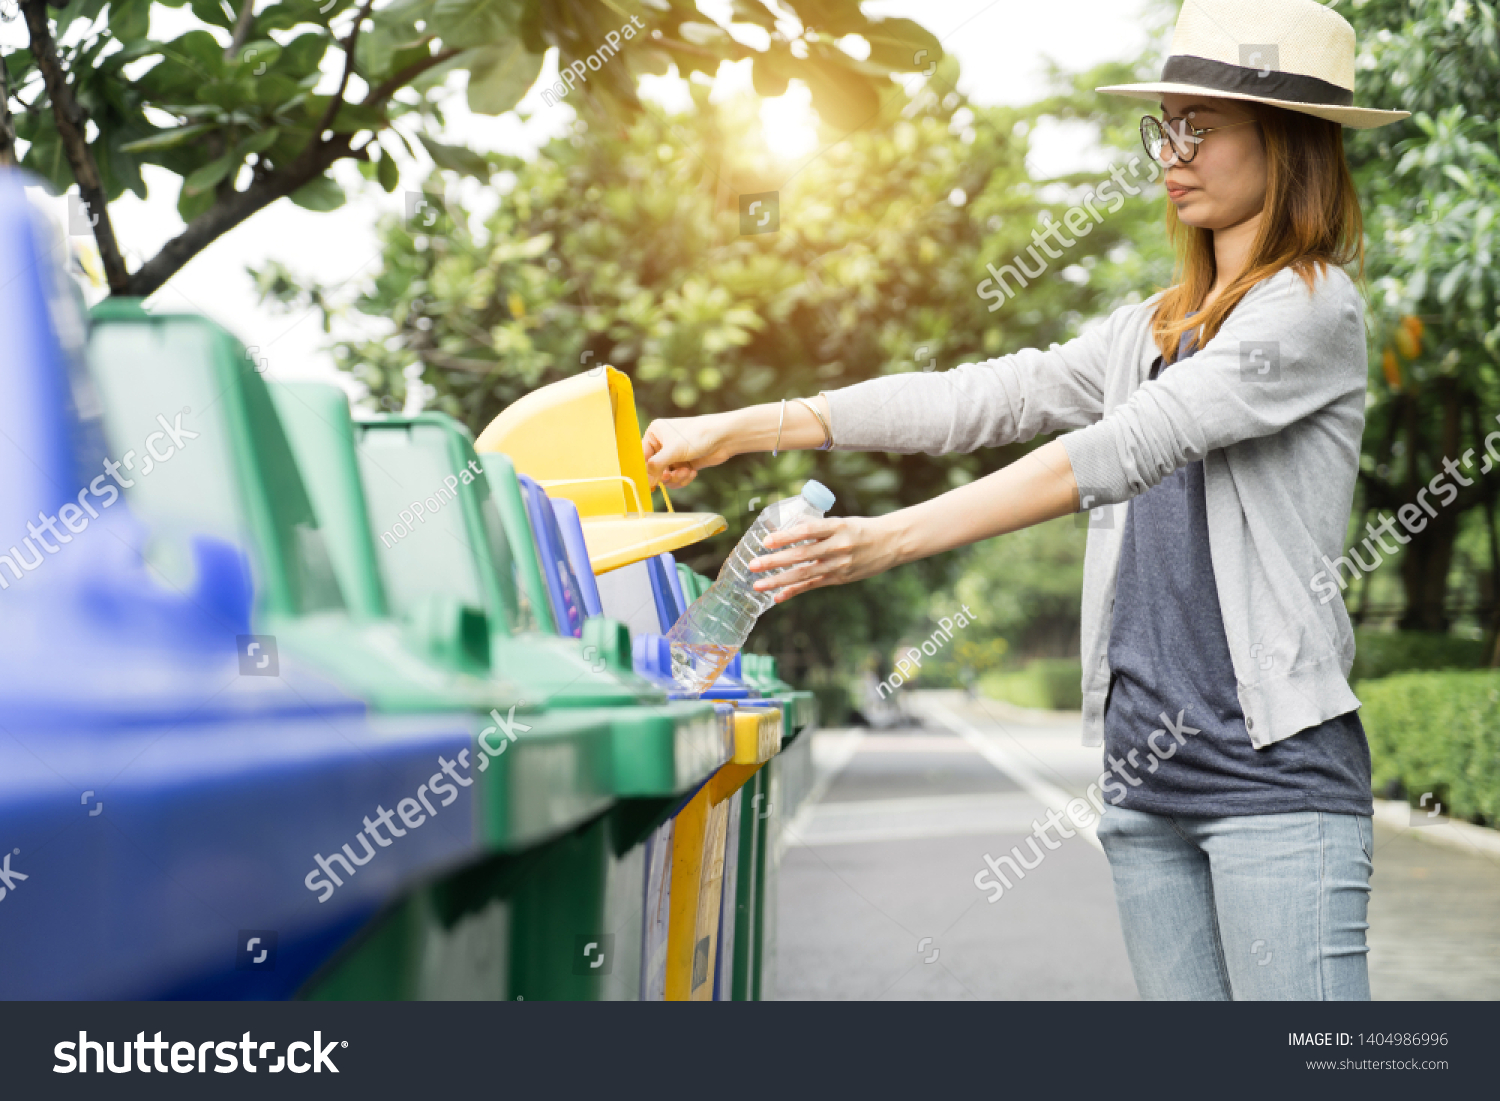 Recycle rubbish waste management people, Woman separate plastic bottle to container recycle bin. Waste separation rubbish to garbage bin, environment care pollution trash recycling management concept. #1404986996